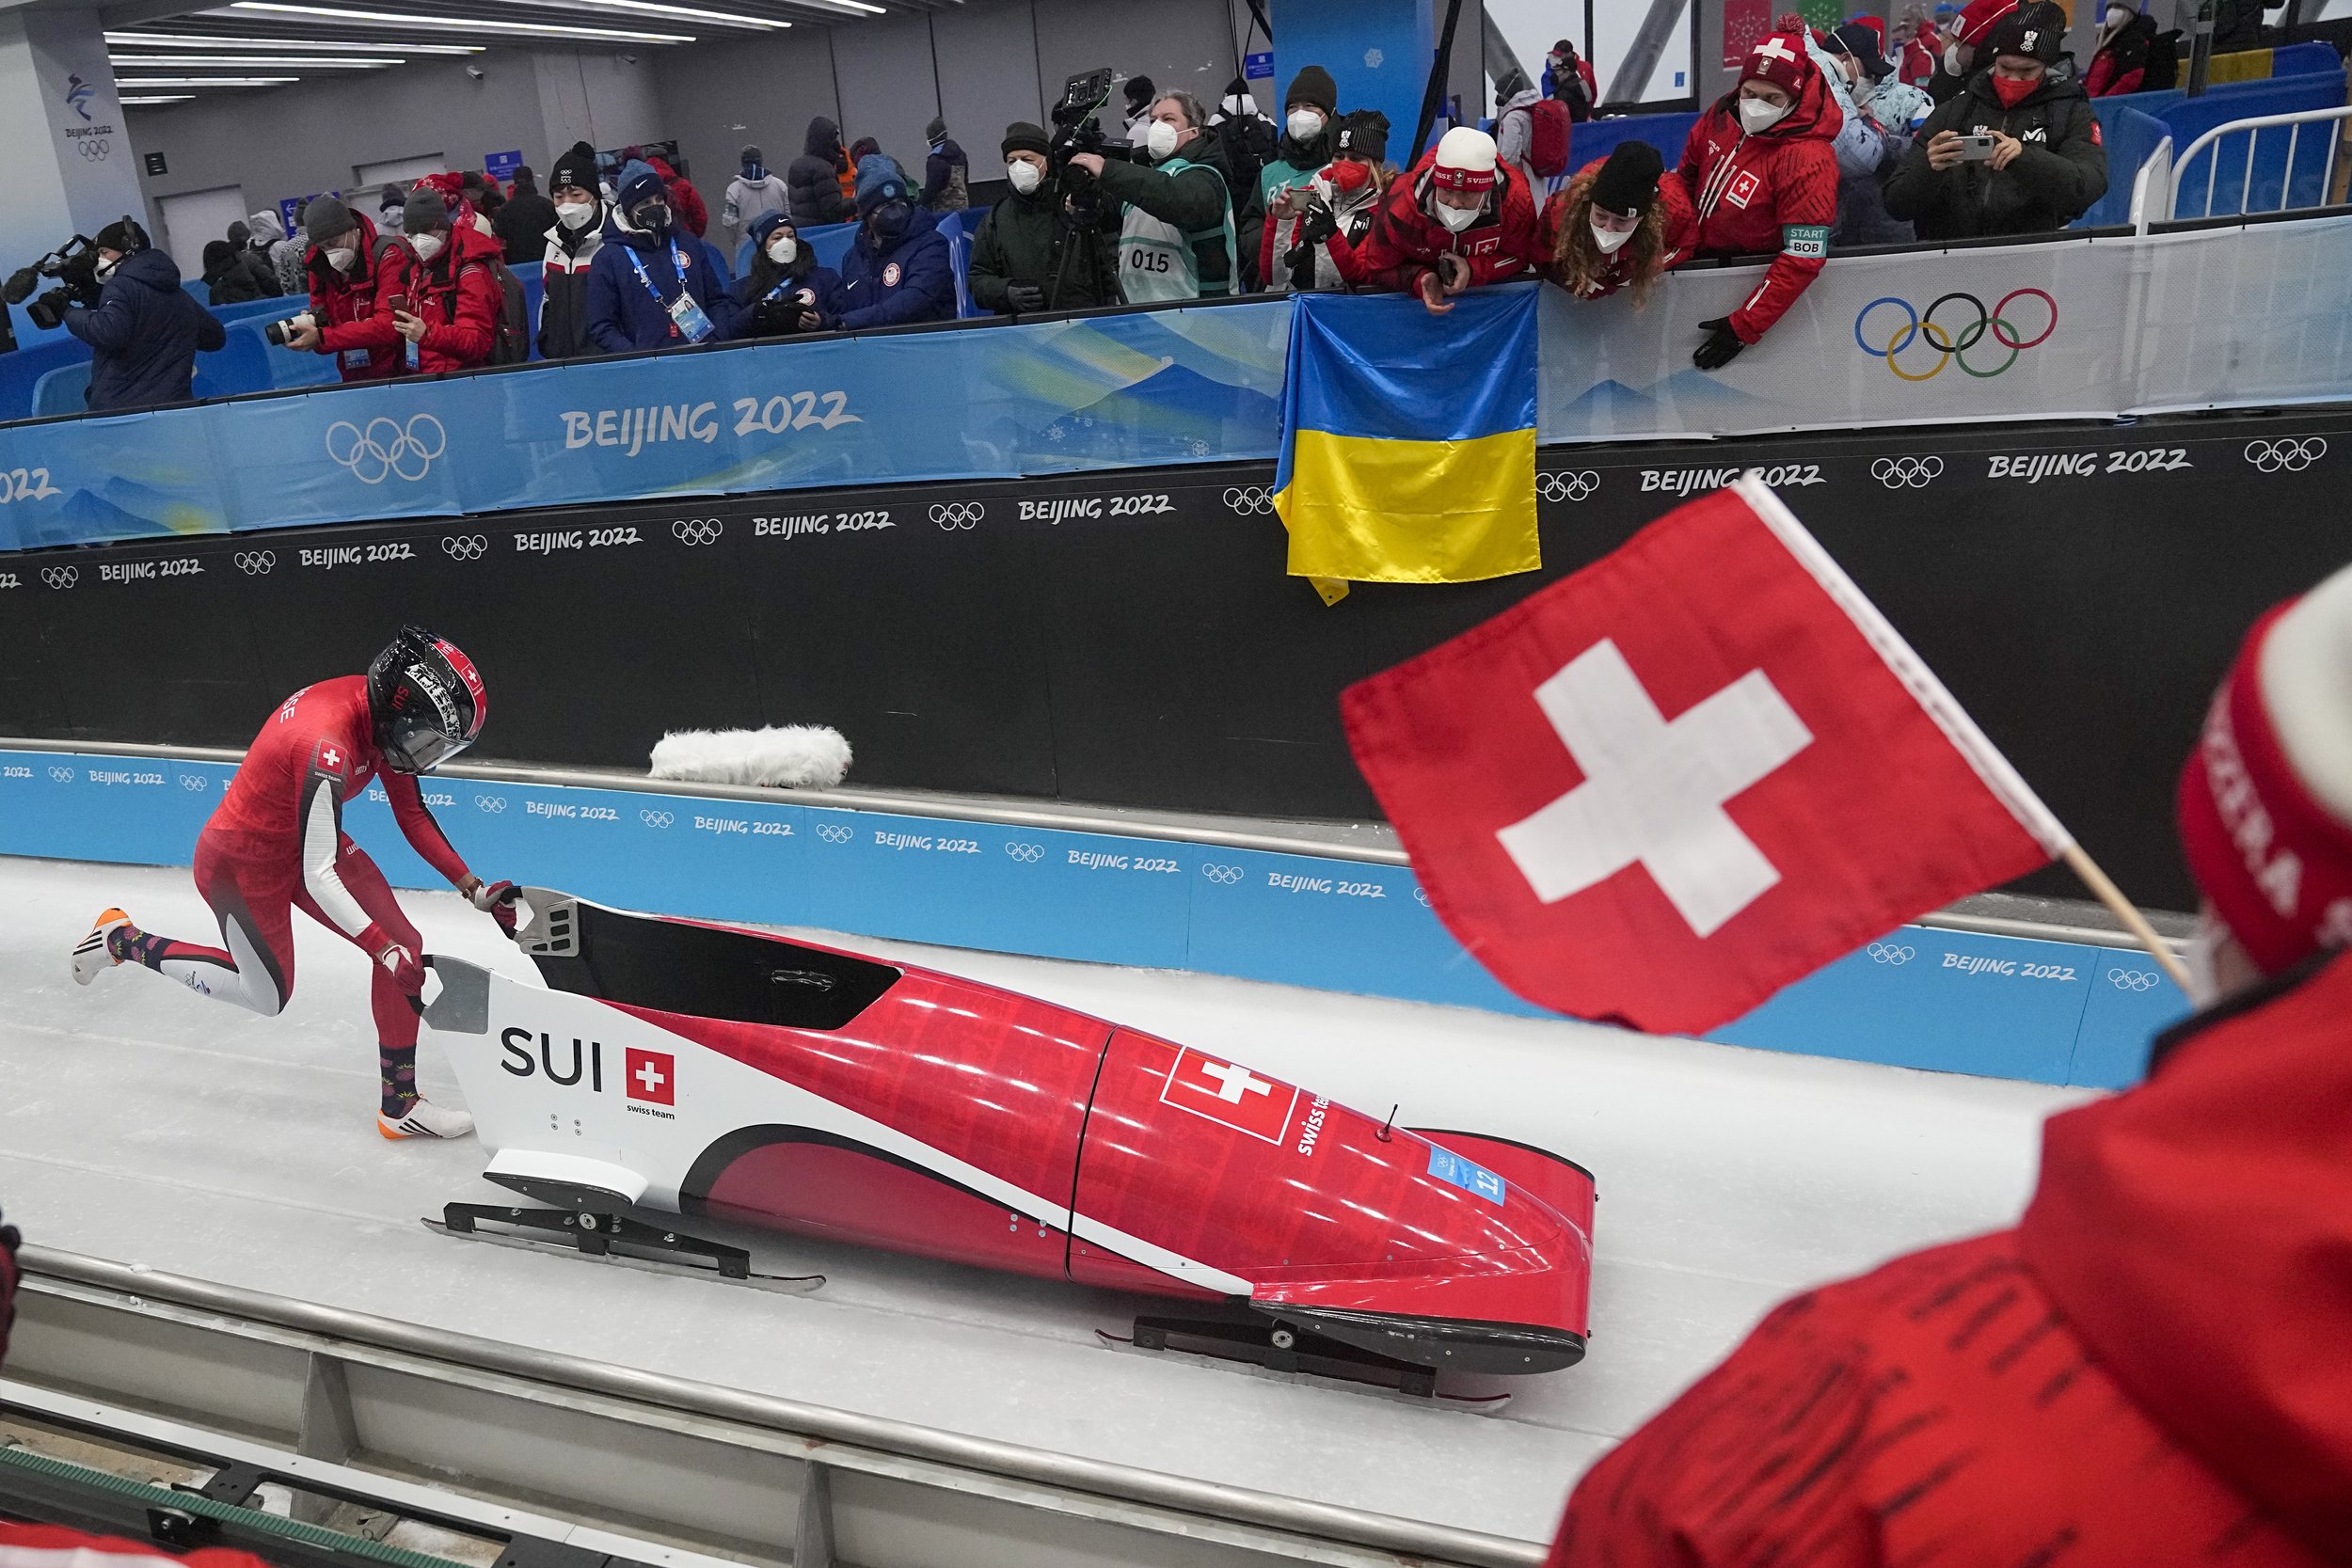  Melanie Hasler, of Switzerland, drives her bobsled during women's monobob heat 1 at the 2022 Winter Olympics, Sunday, Feb. 13, 2022, in the Yanqing district of Beijing. (AP Photo/Pavel Golovkin) 